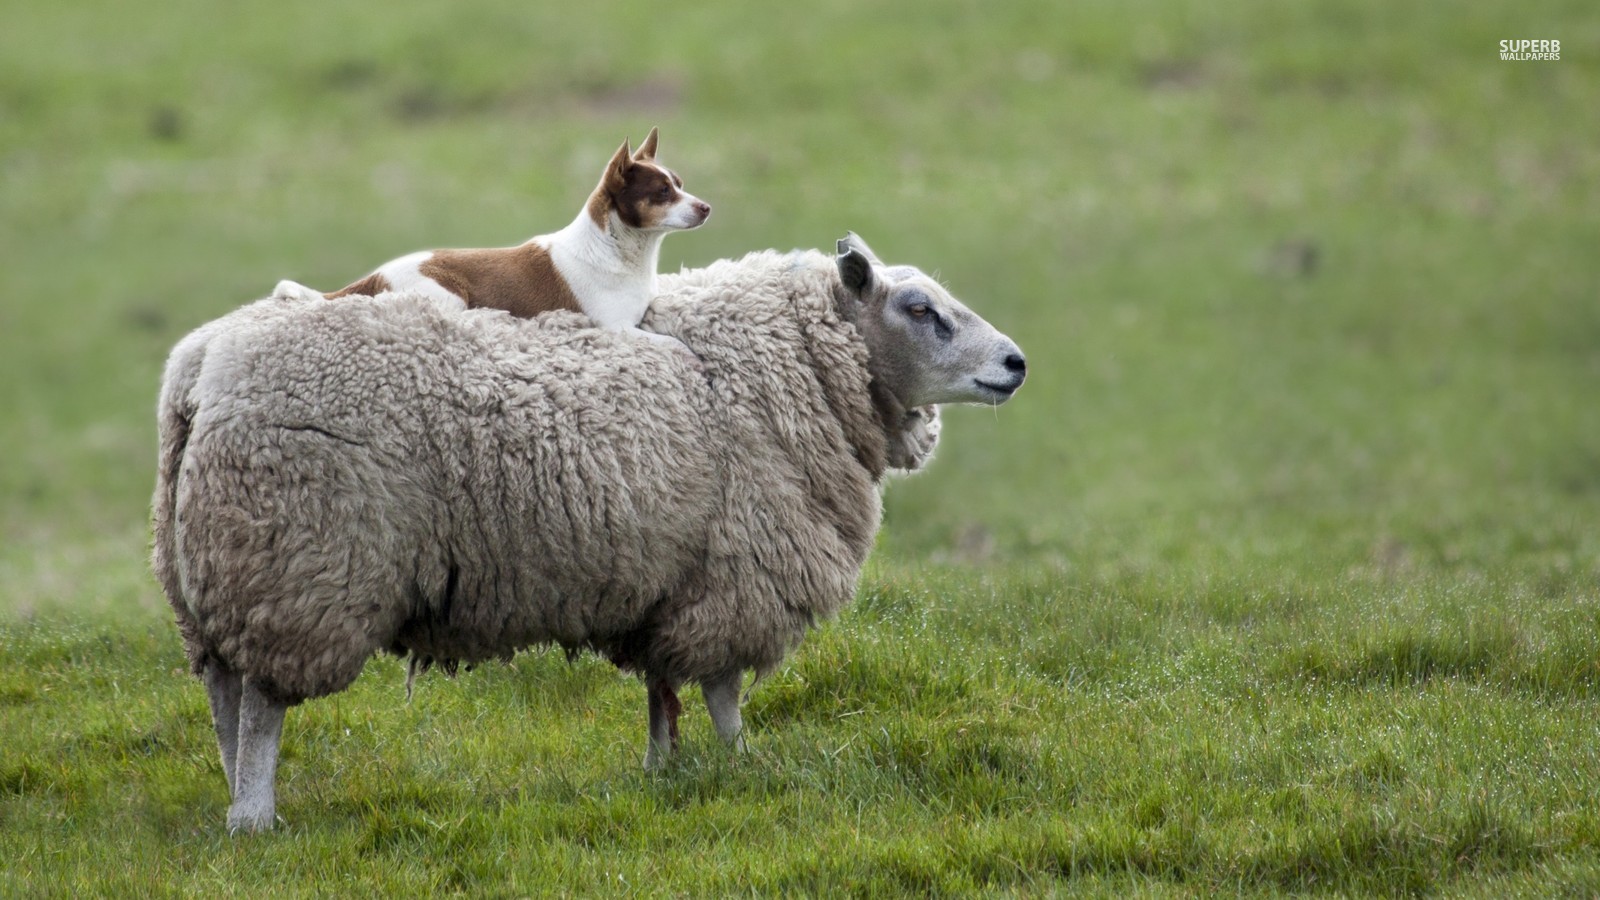 Sheep Image Dog And HD Wallpaper Background Photos